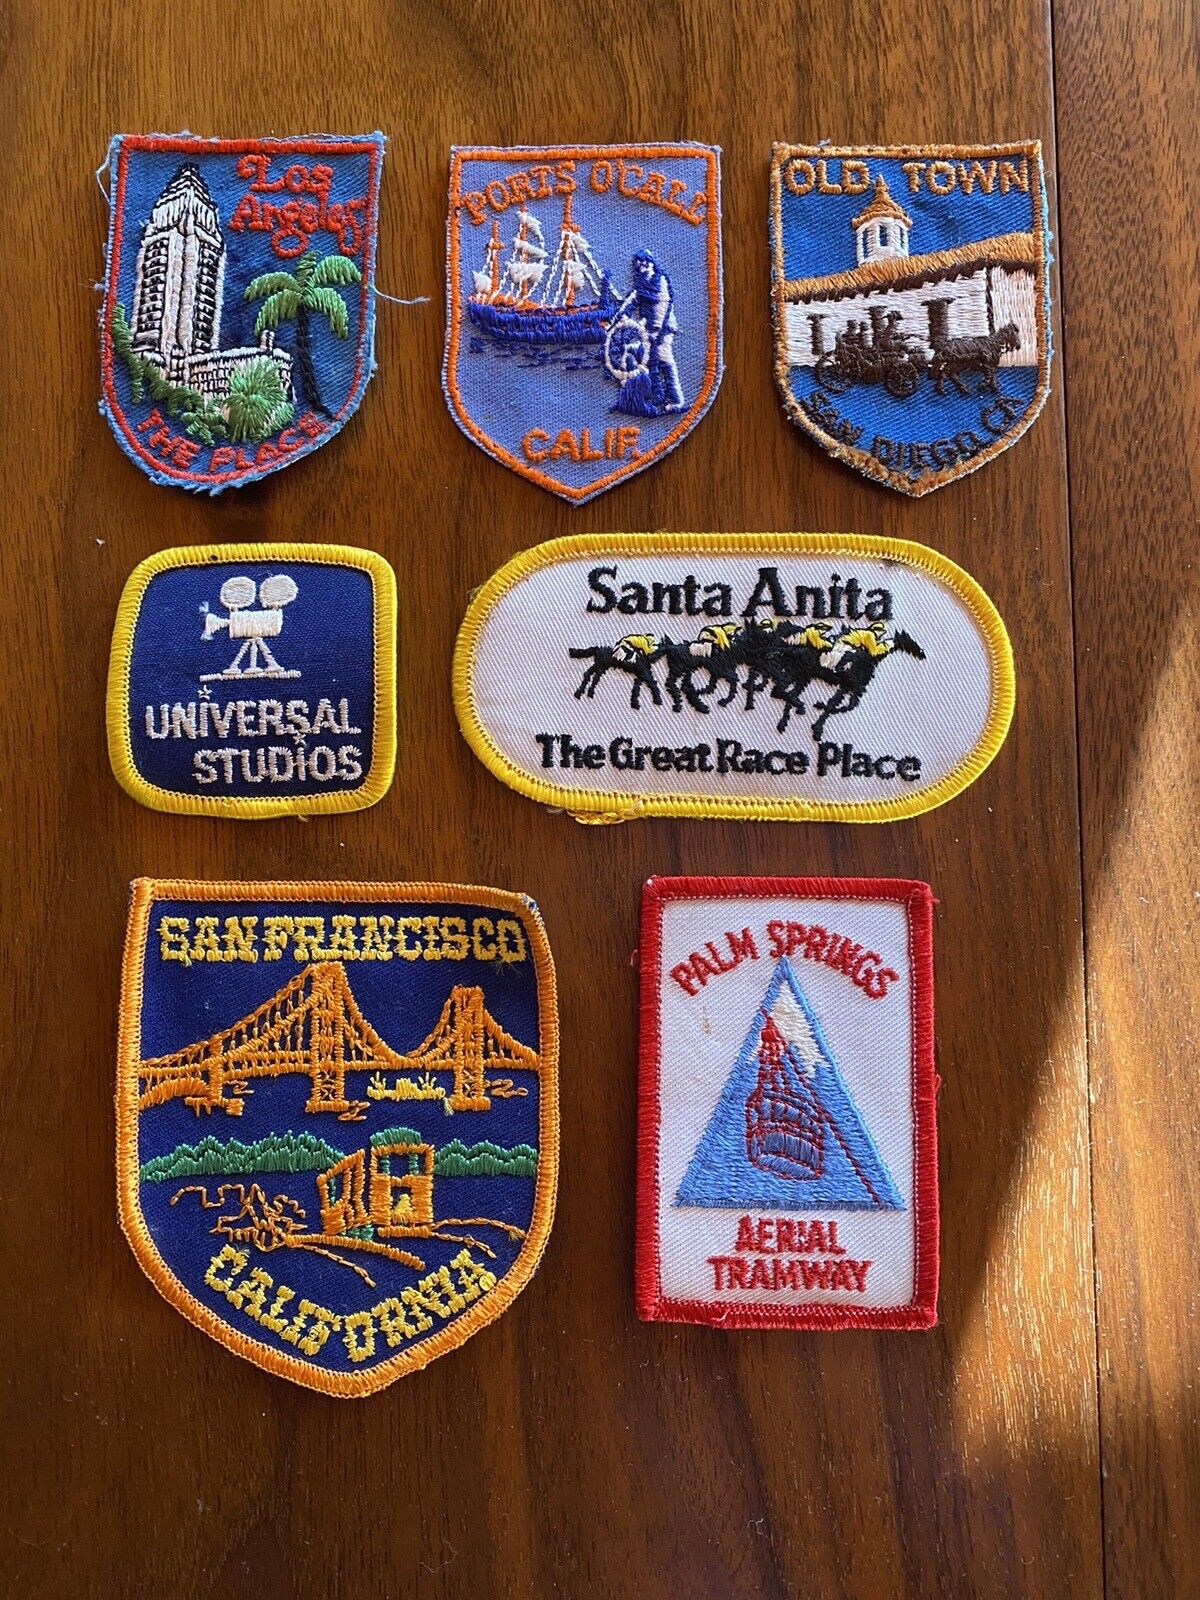 Vintage Travel Patches From California. Cities And Attractions. 